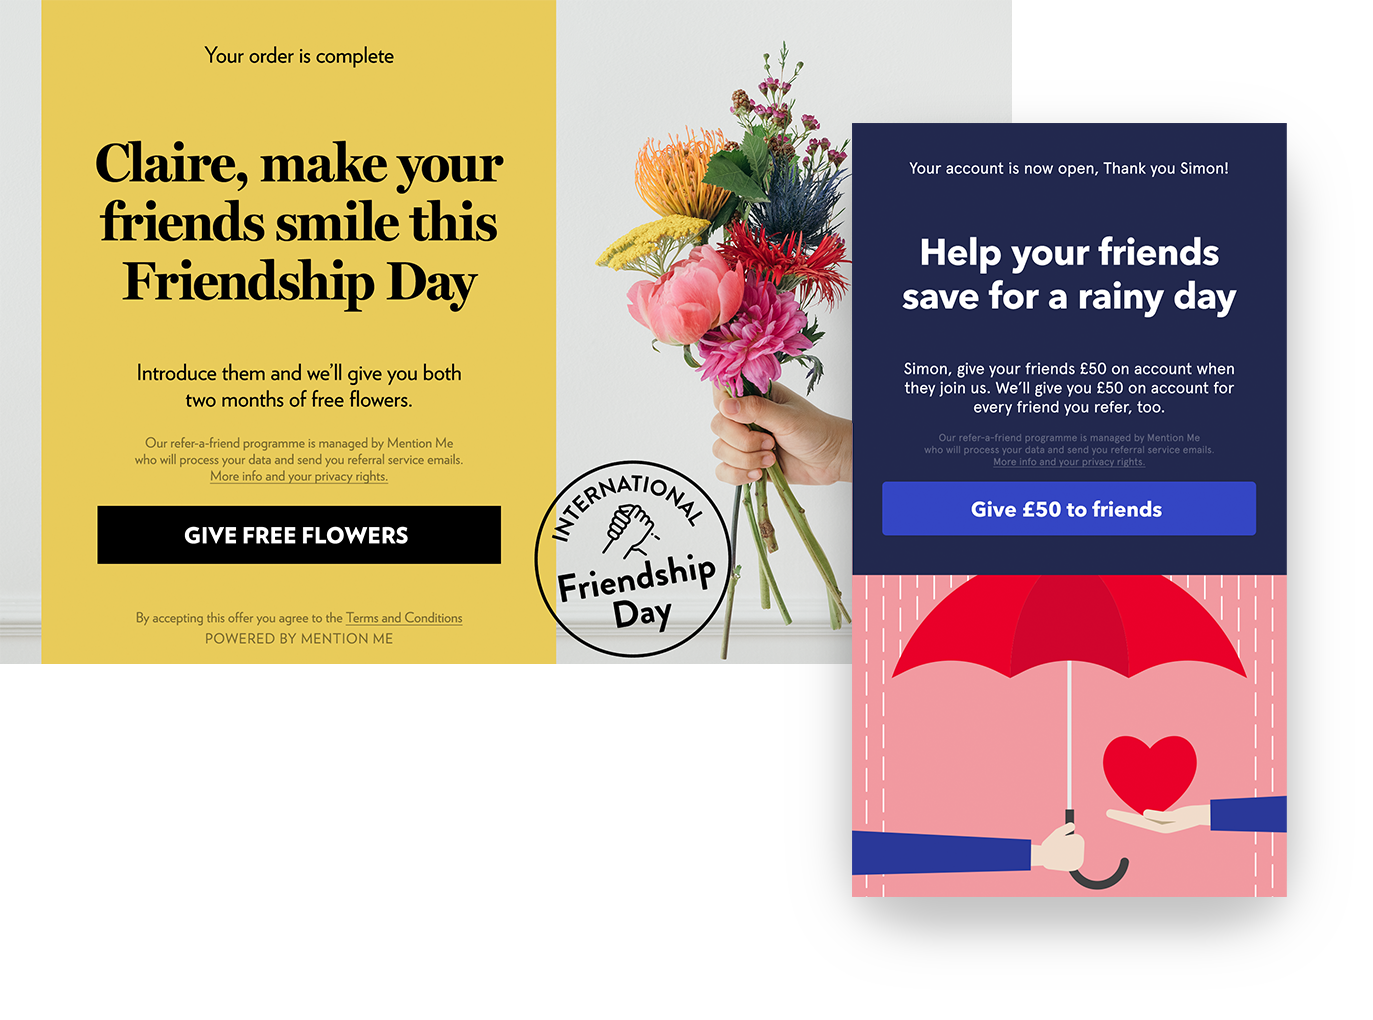 Example design and messaging for International Friendship Day